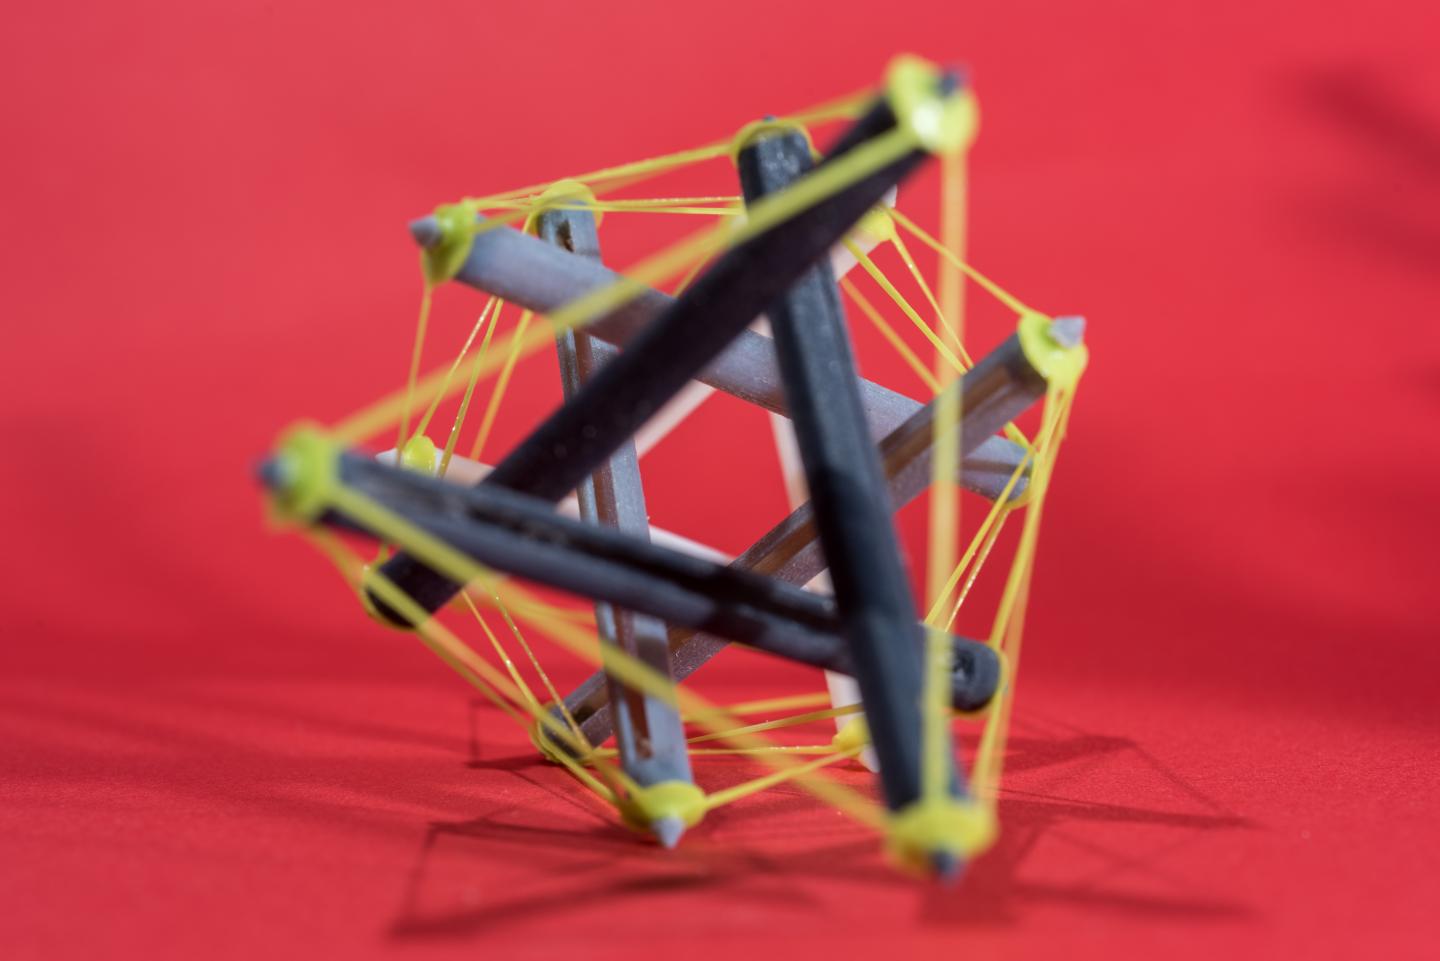 3-D Printed Tensegrity Structure